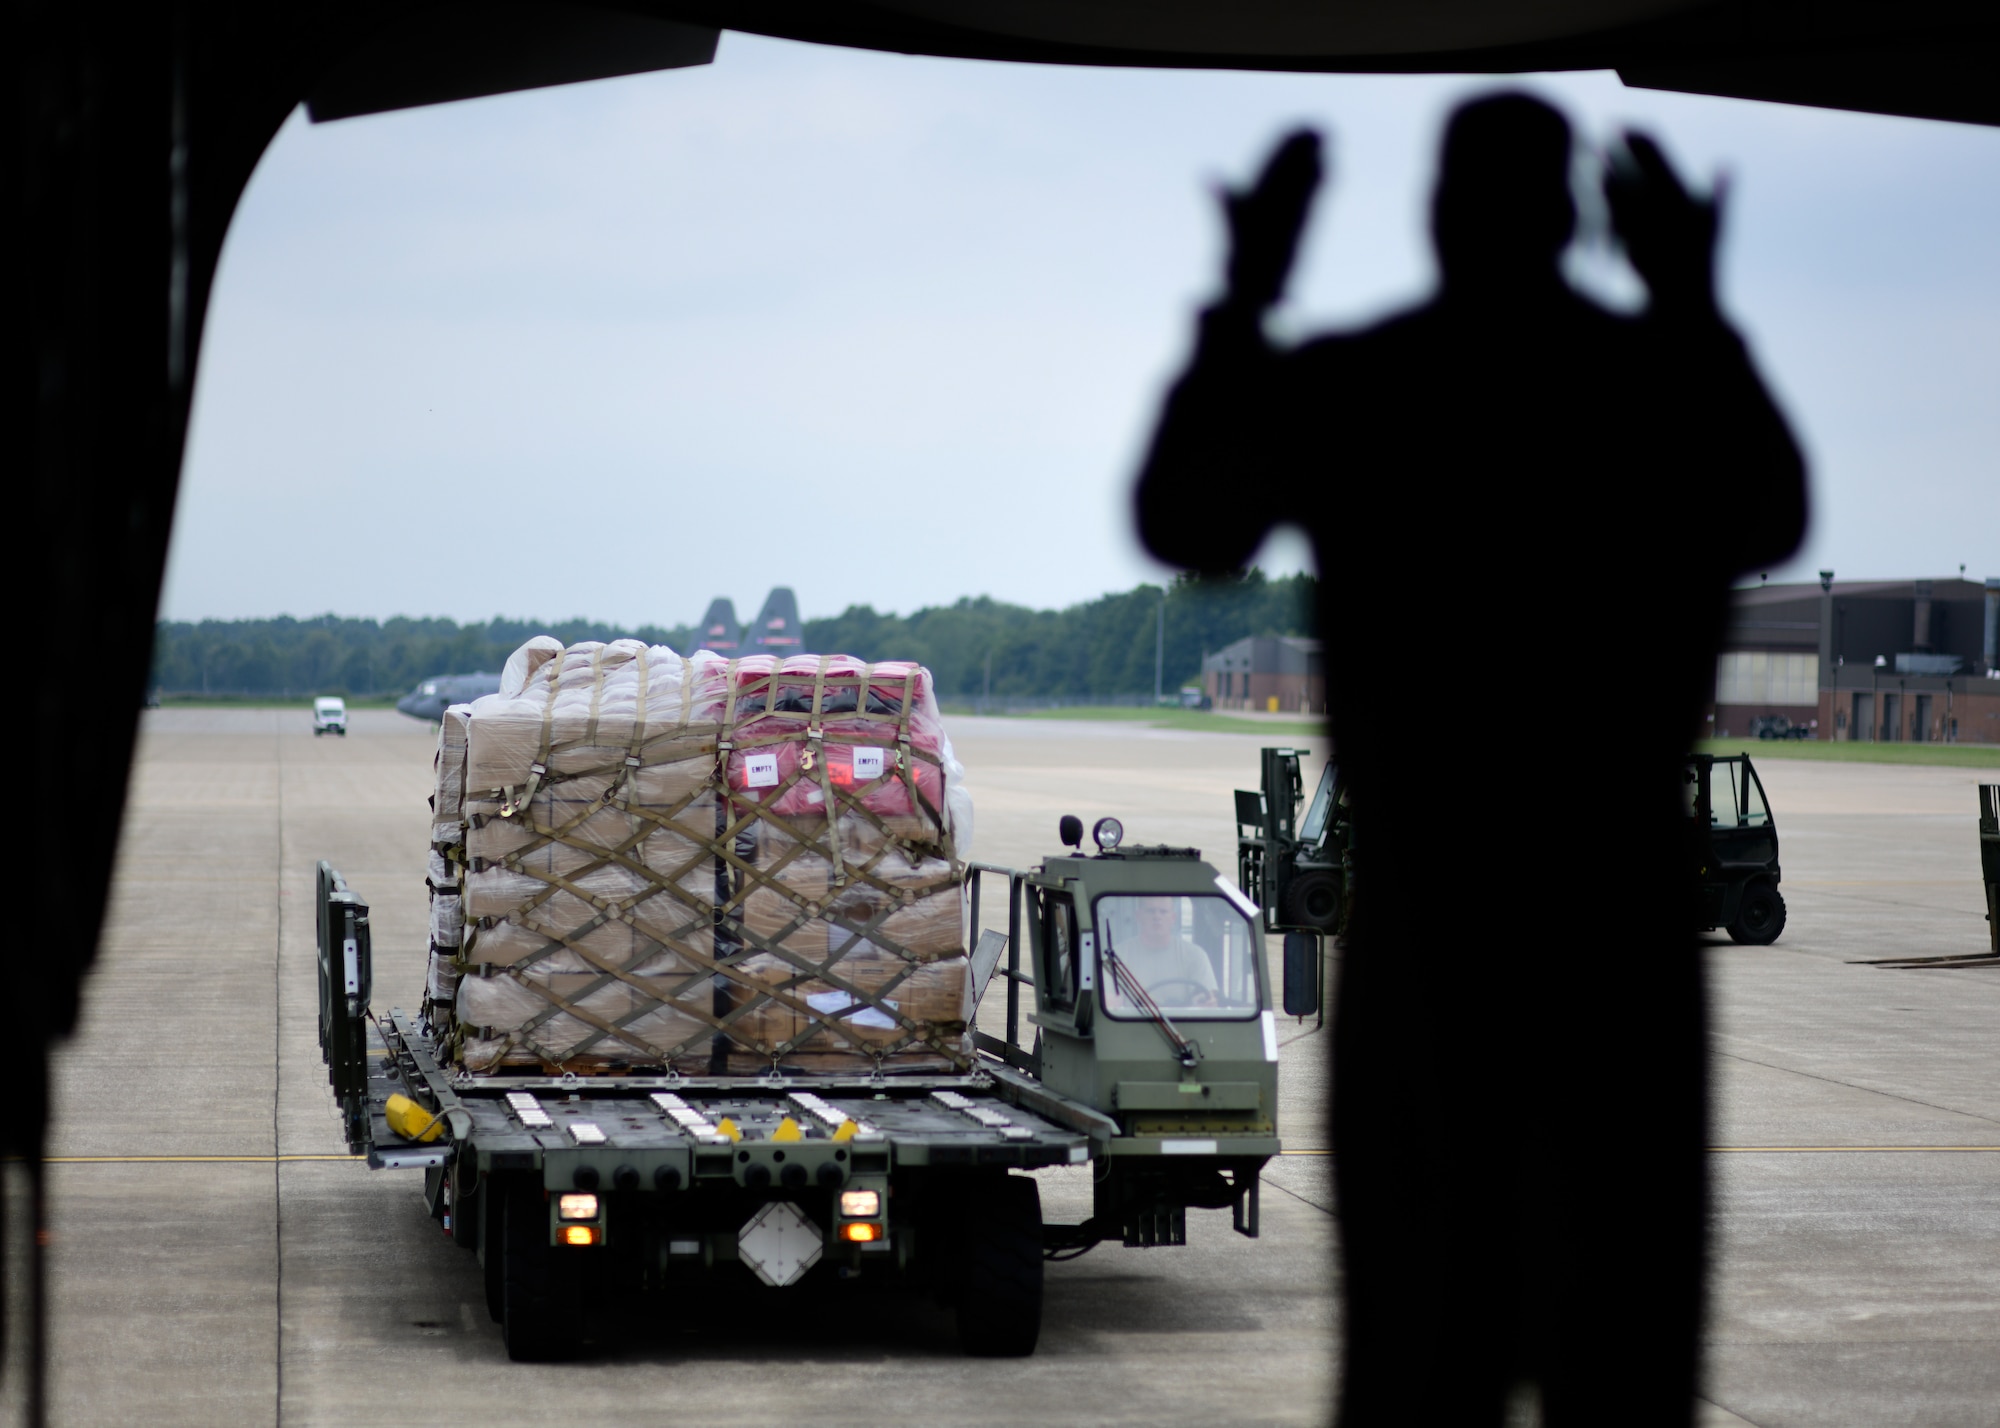 Since 2007, YARS has delivered over a million pounds of cargo to destinations around the globe via the Denton program.